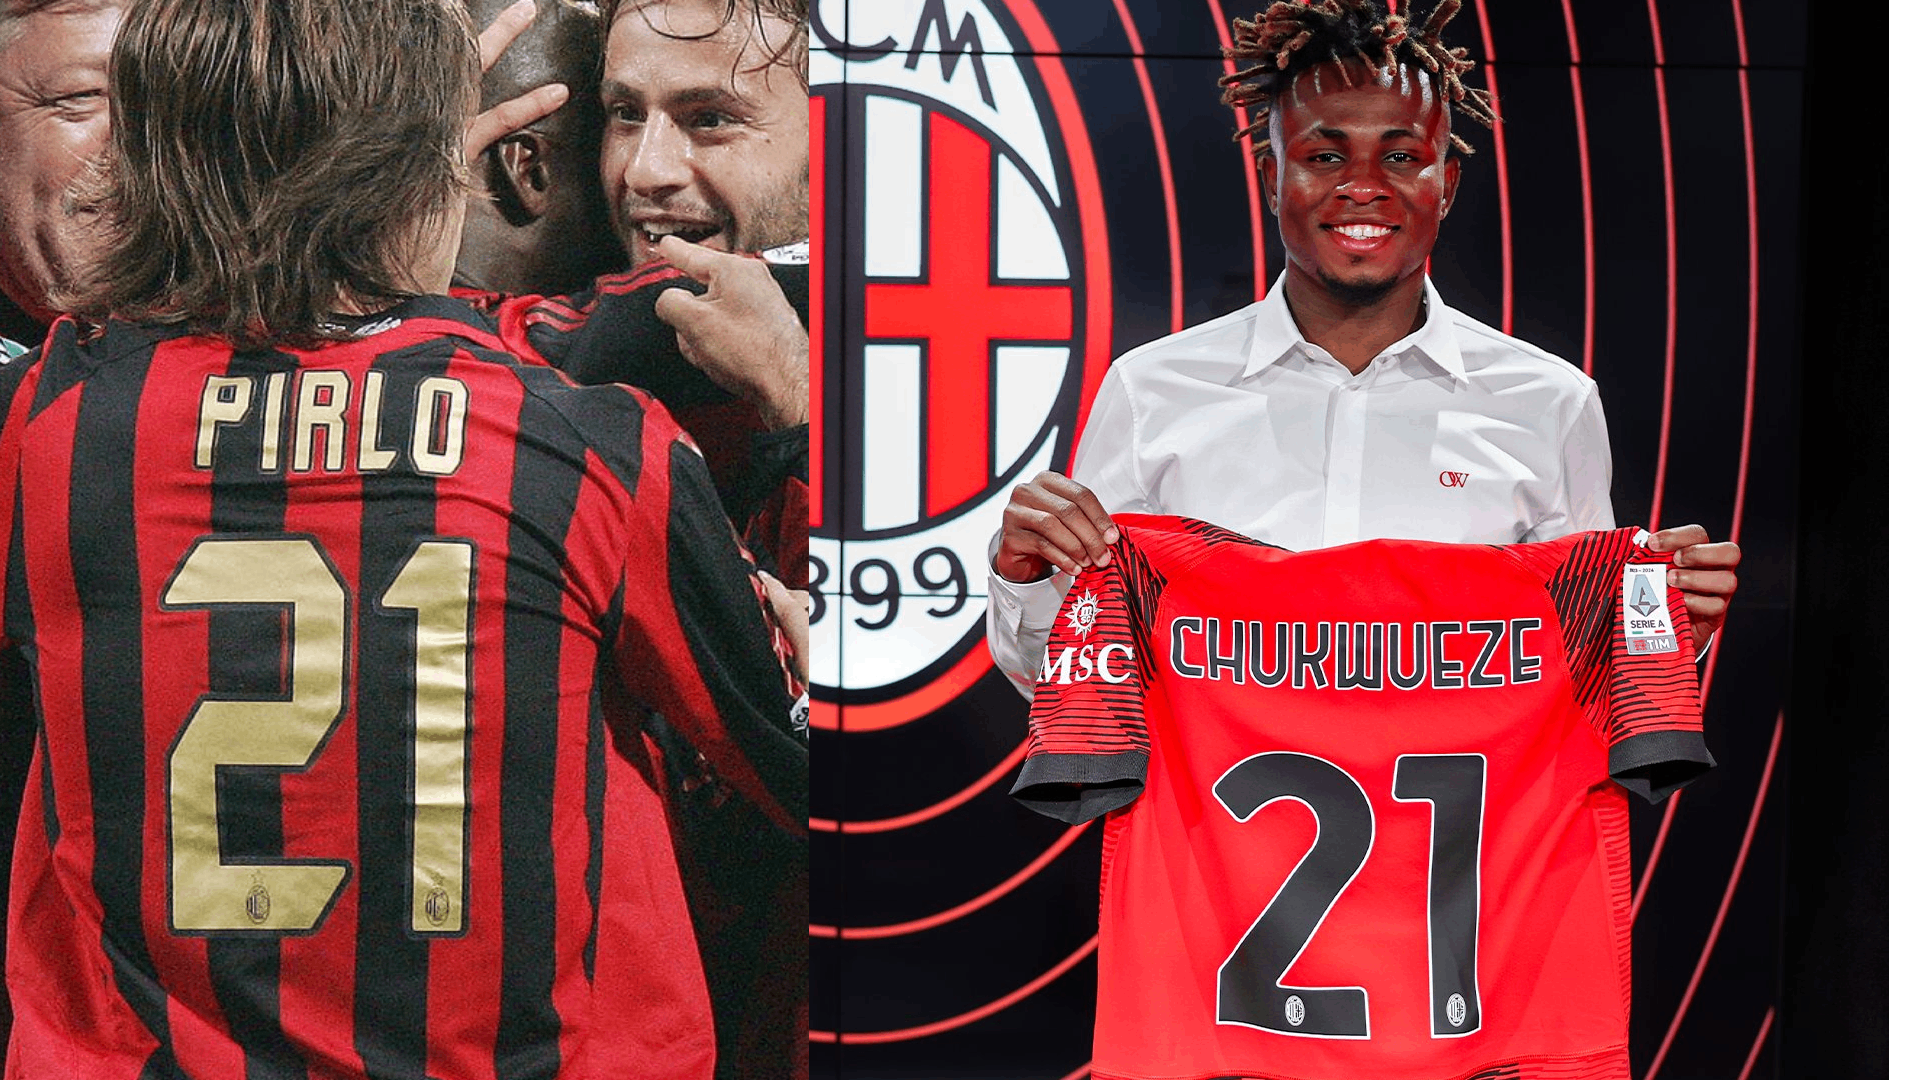 Chukwueze to follow in footsteps of AC Milan greats like Pirlo, Inzaghi